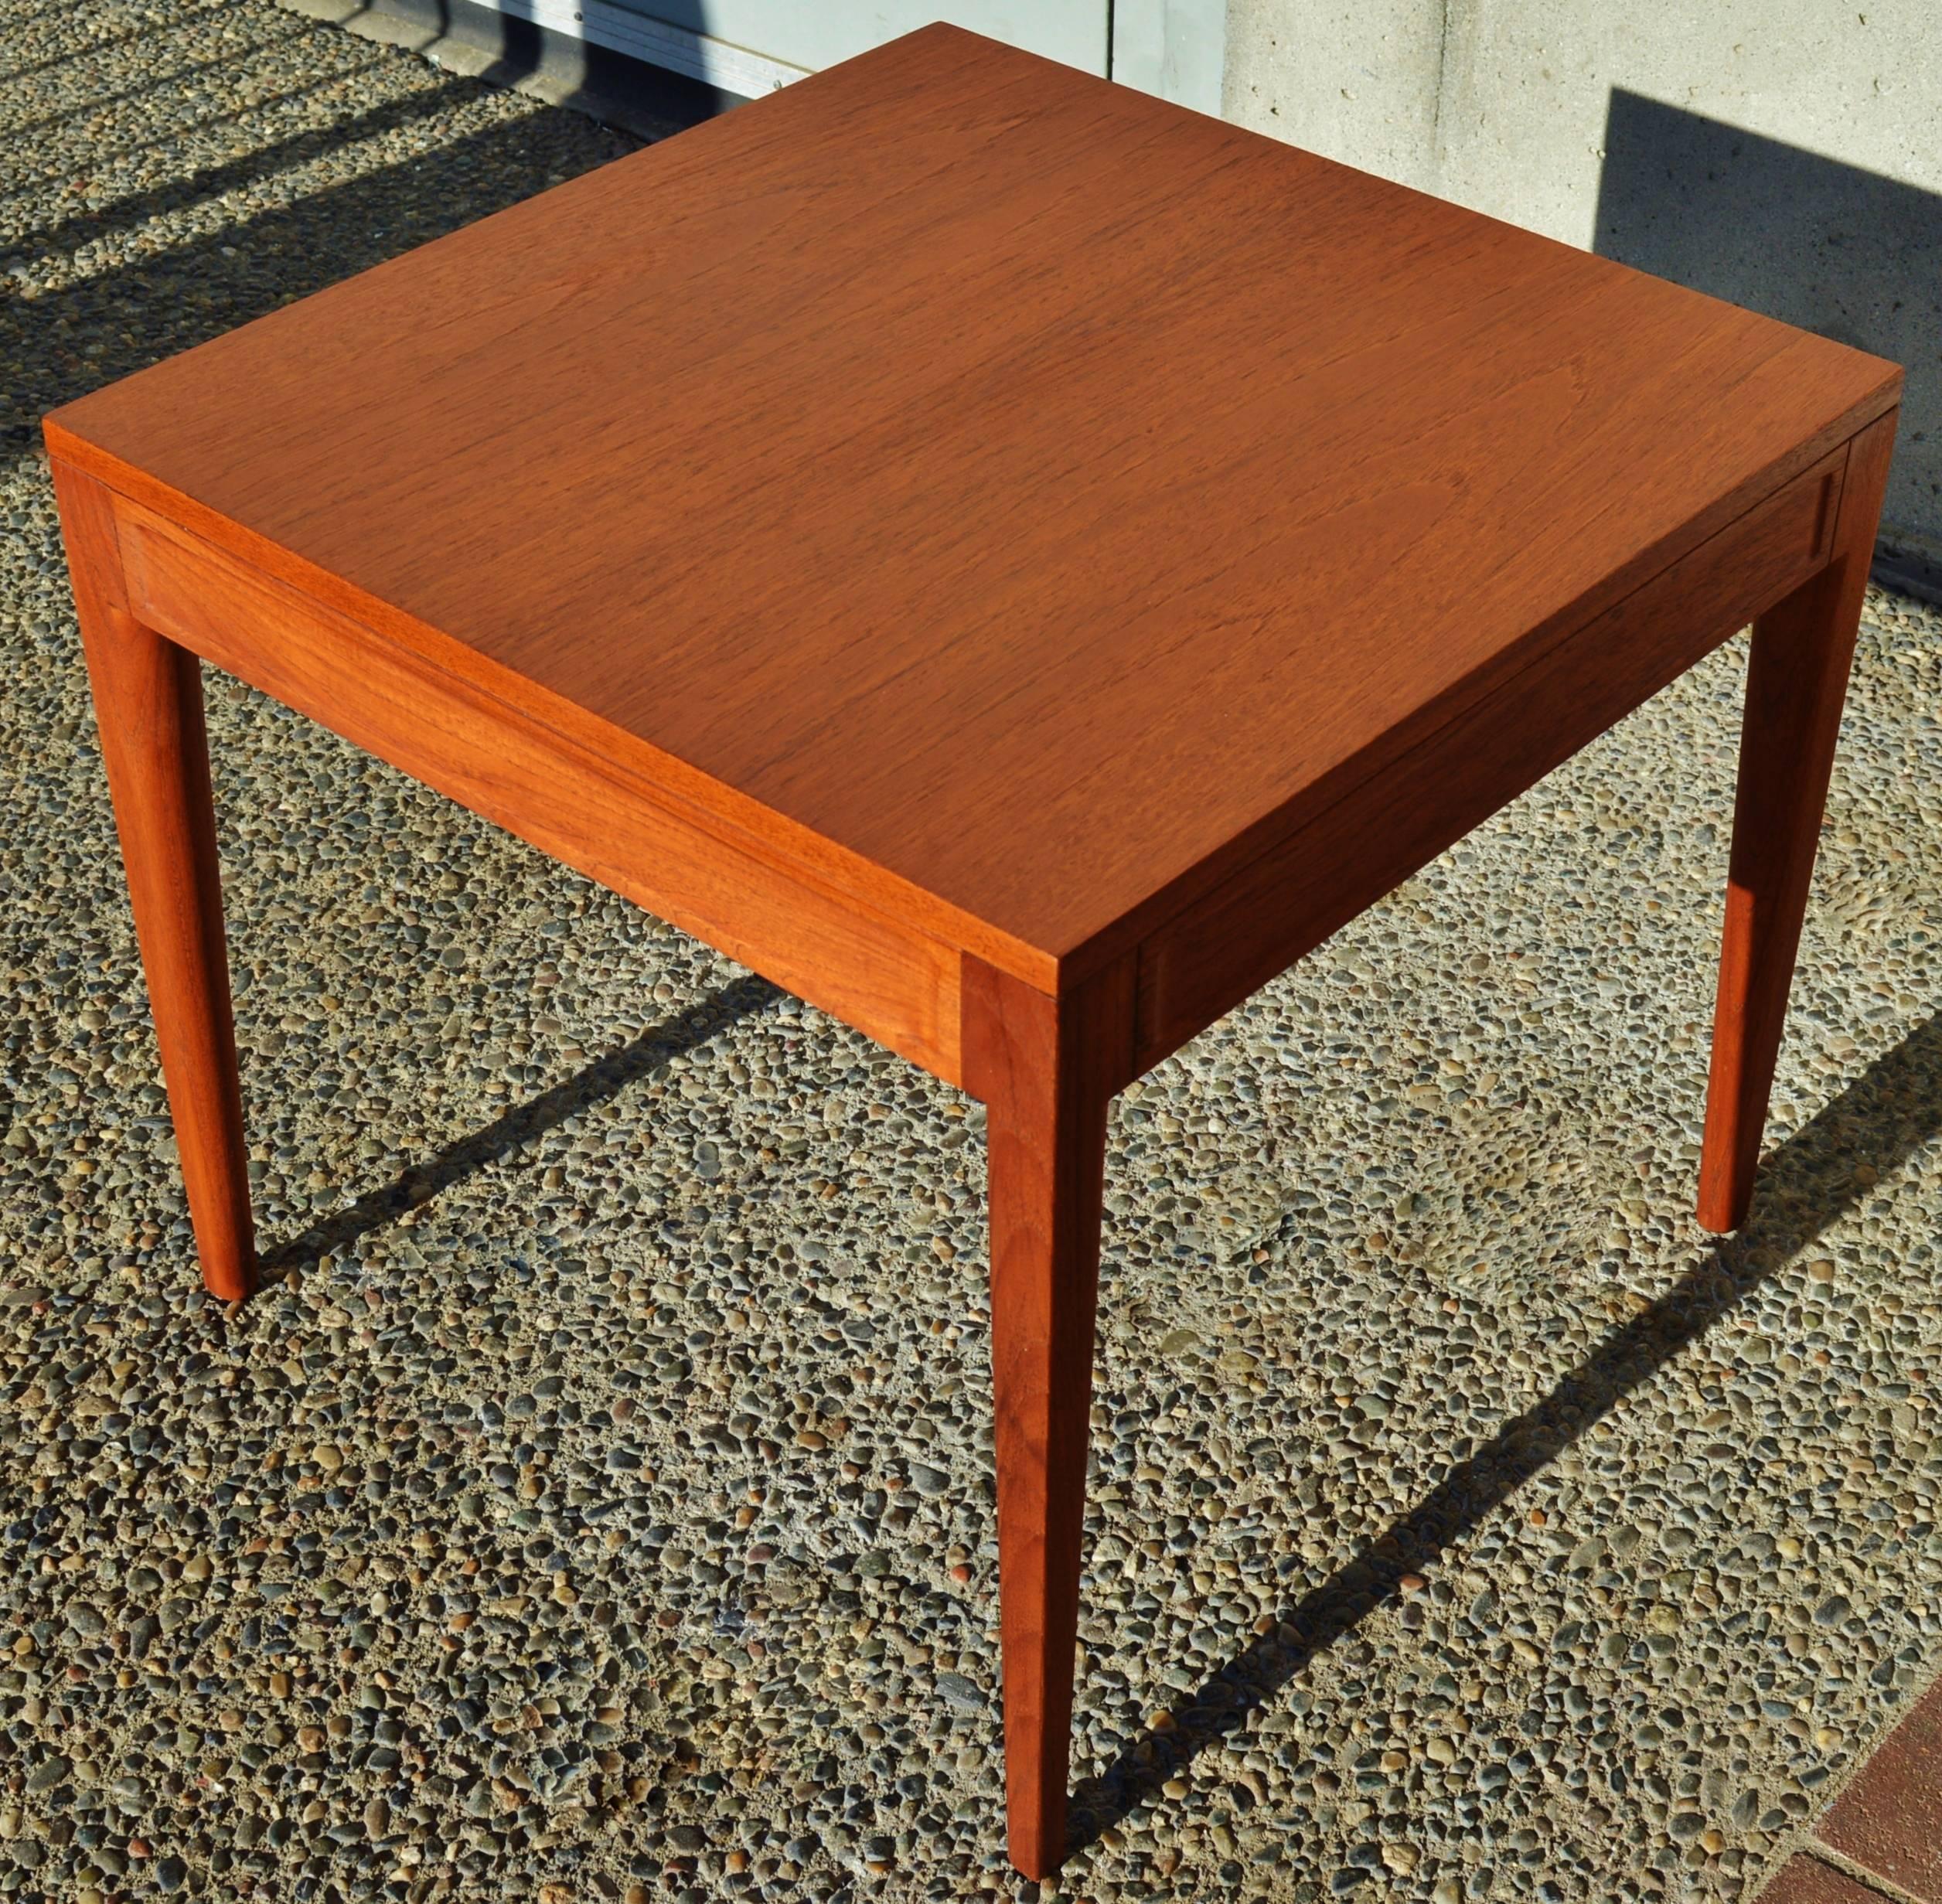 This gorgeous Danish modern teak side or small coffee table was designed by Finn Juhl for France & Son in the 1960s and bears the metal medallion with the maker's mark underneath. The contoured cut-aways carved out of the solid teak side panels